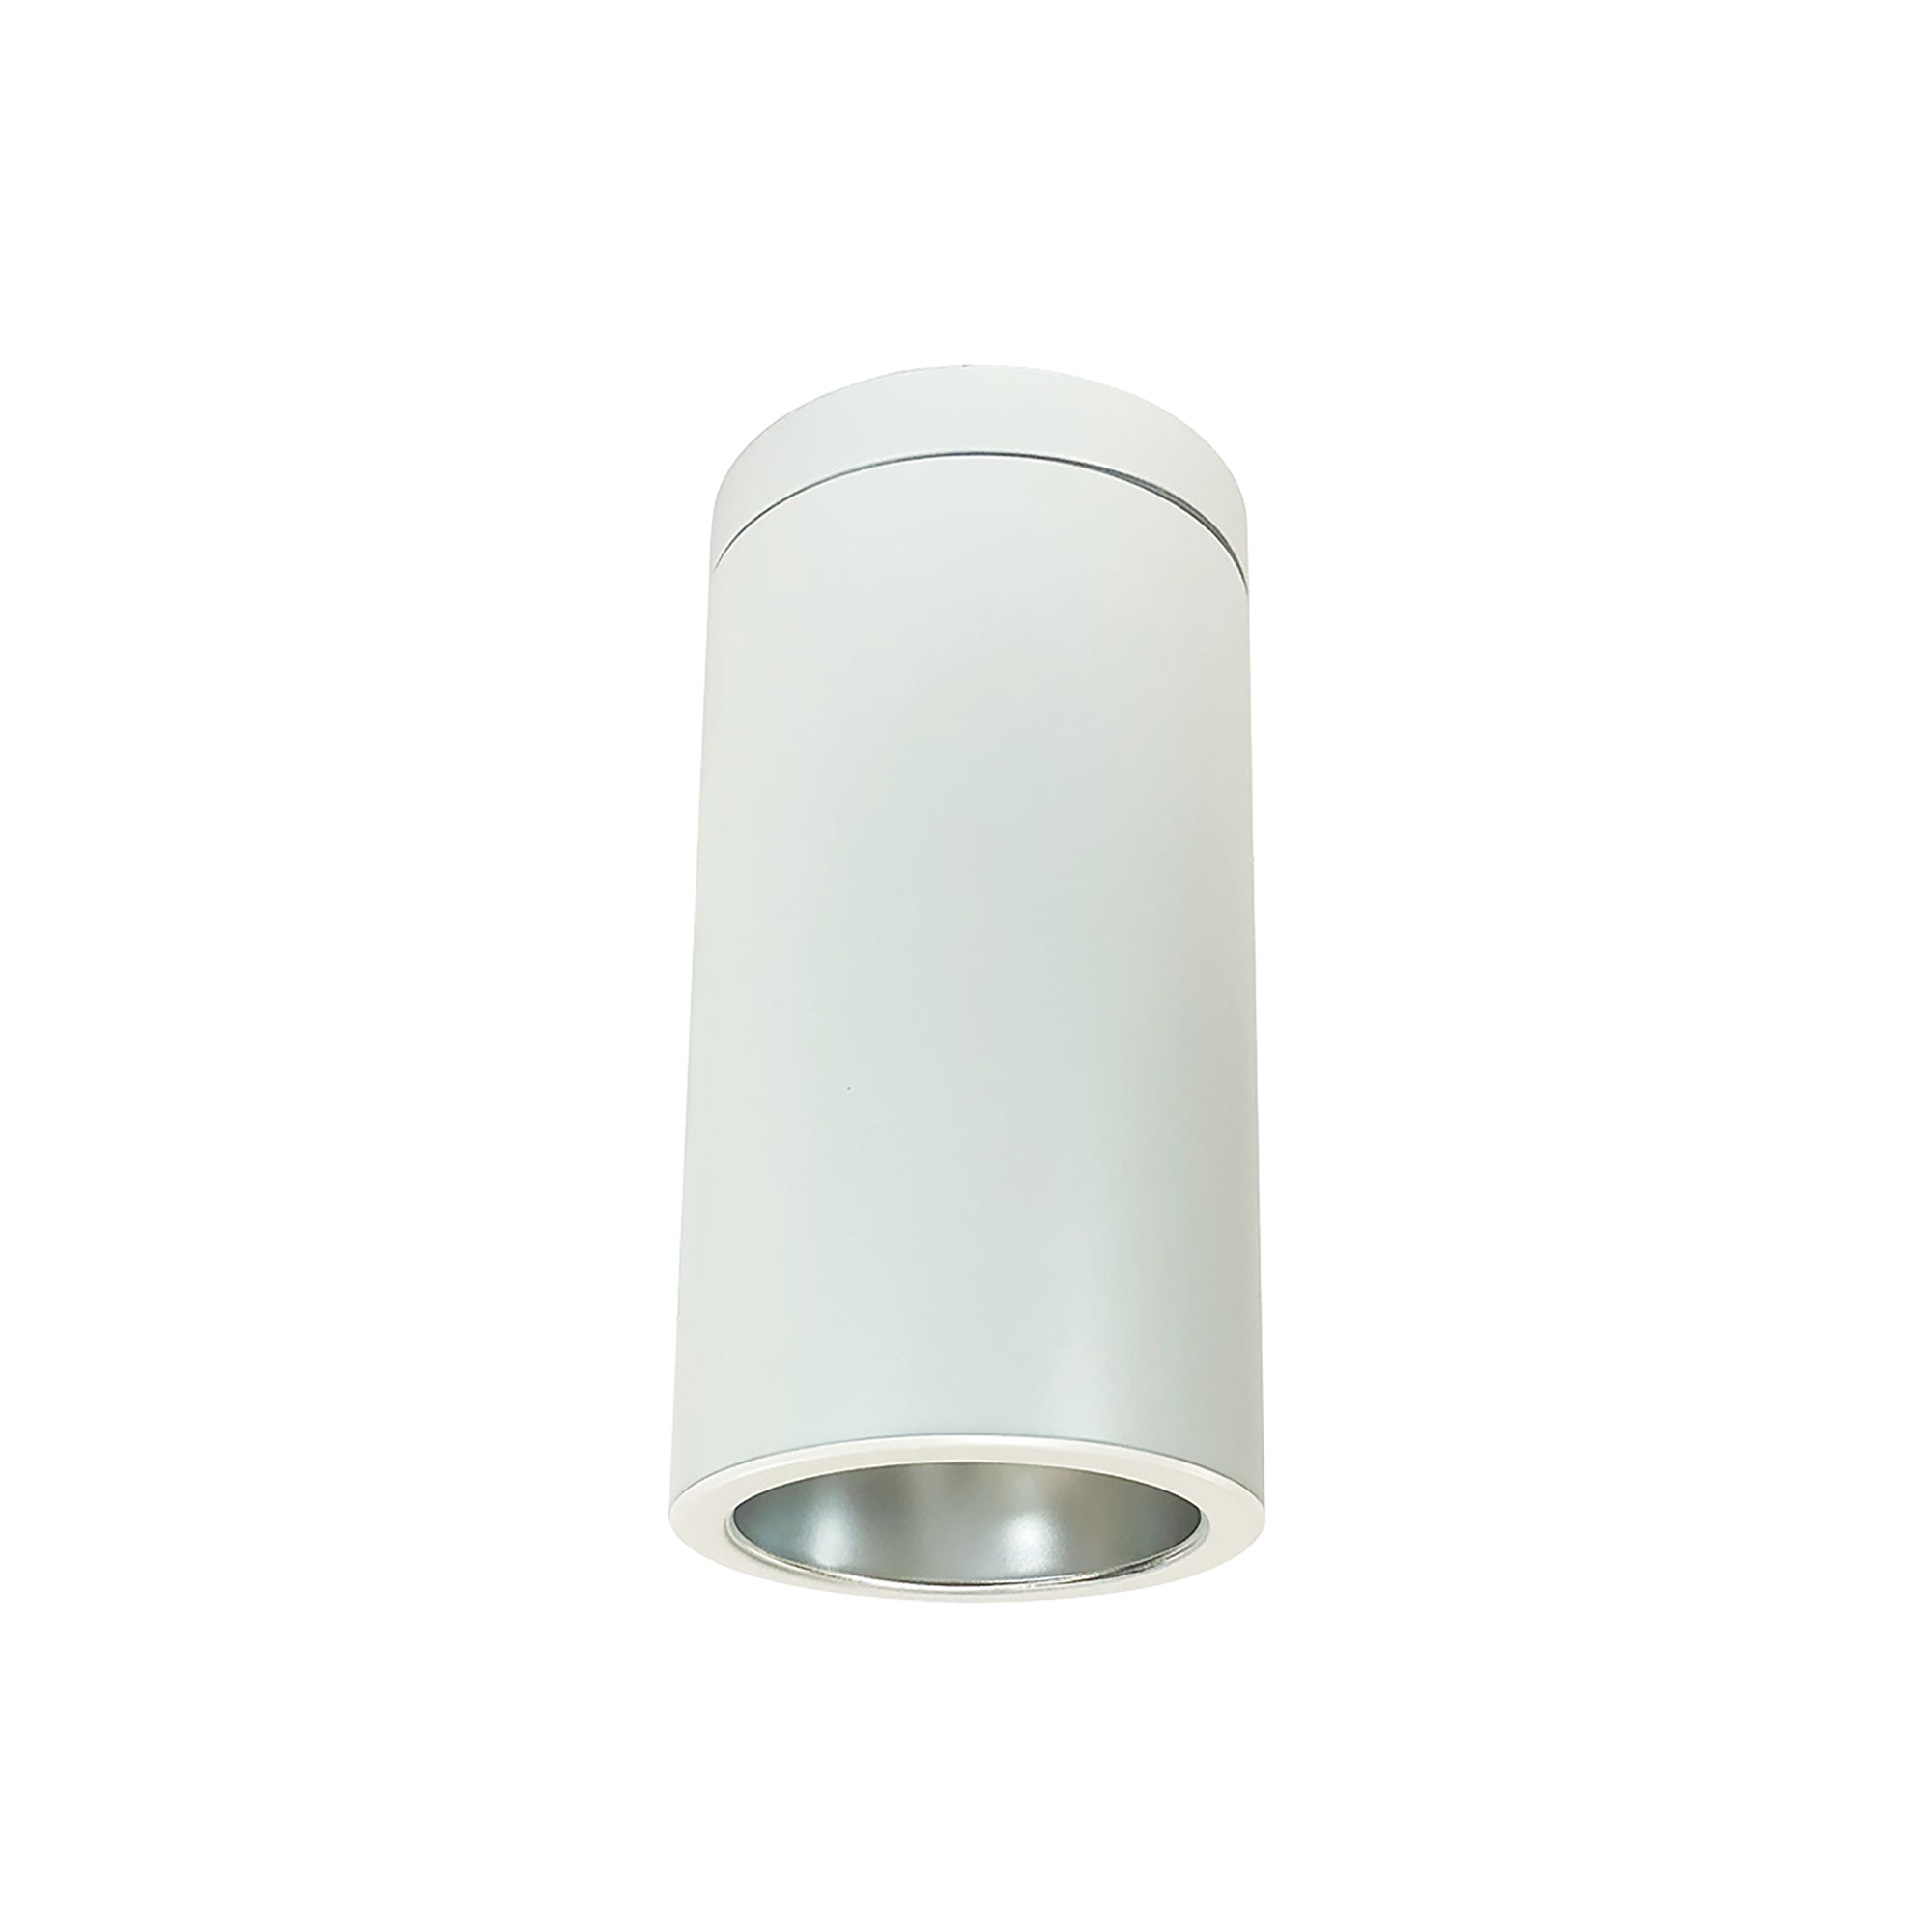 Nora Lighting NYLS2-6S35127FDWW6 - Cylinder - 6 Inch CYL SURFACE 3500LM REF 27K FLOOD DIFF/WHITE WH CYL 120-277V 0-10V